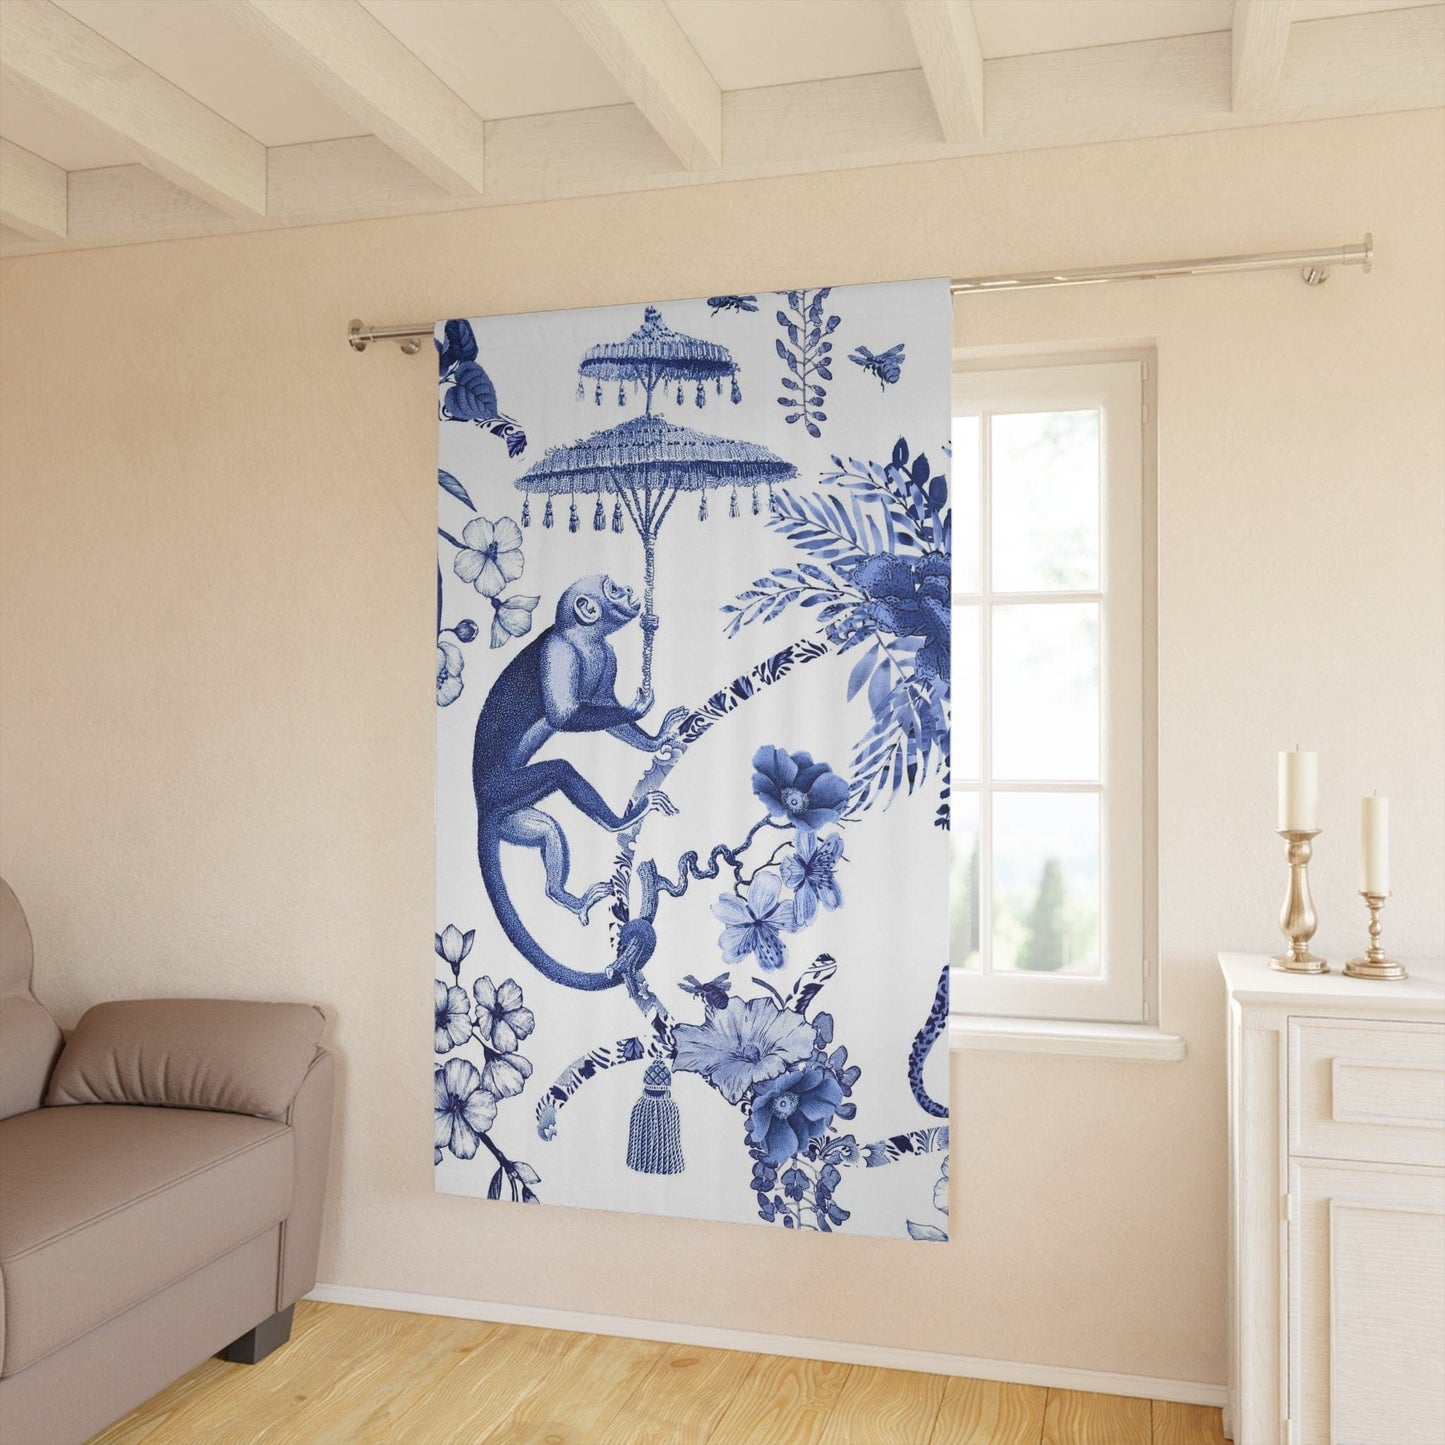 Kate McEnroe New York Chinoiserie Jungle Botanical Toile Window Curtains, Blue, White Chinoiserie Floral Curtain Panels, Country Farmhouse Decor - 122581123 Window Curtains